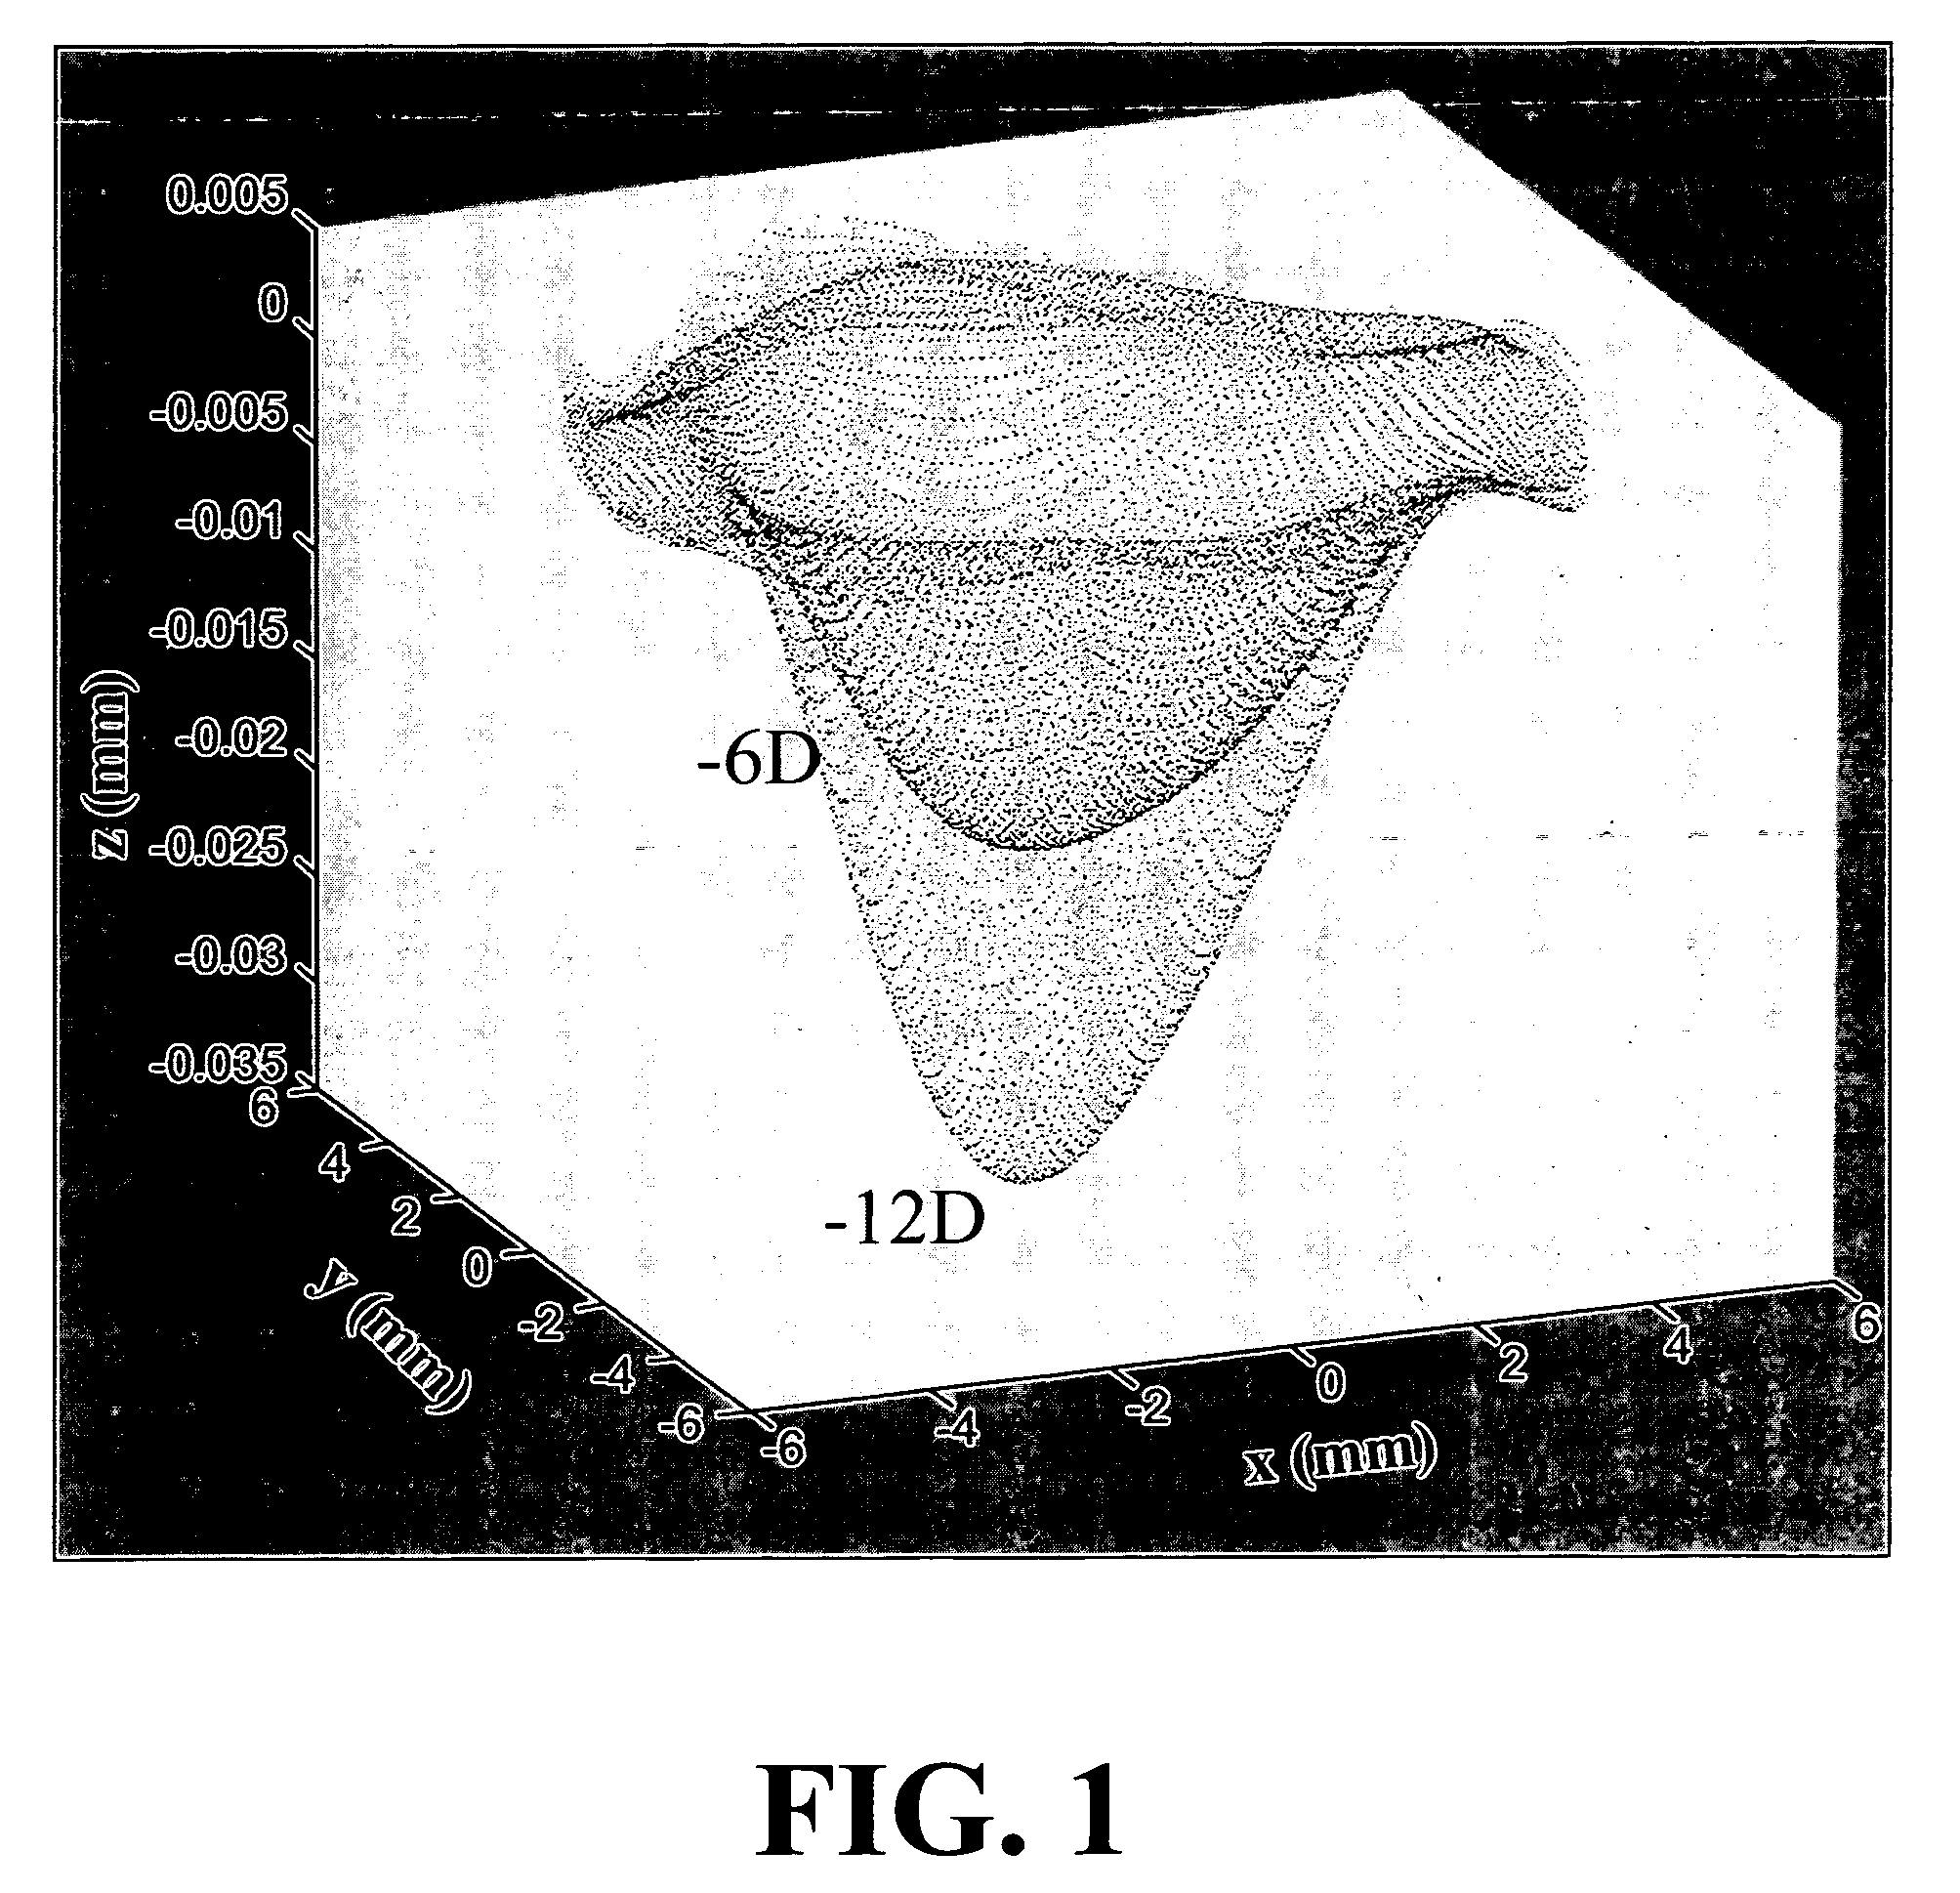 Method of preventing the induction of aberrations in laser refractive surgery systems